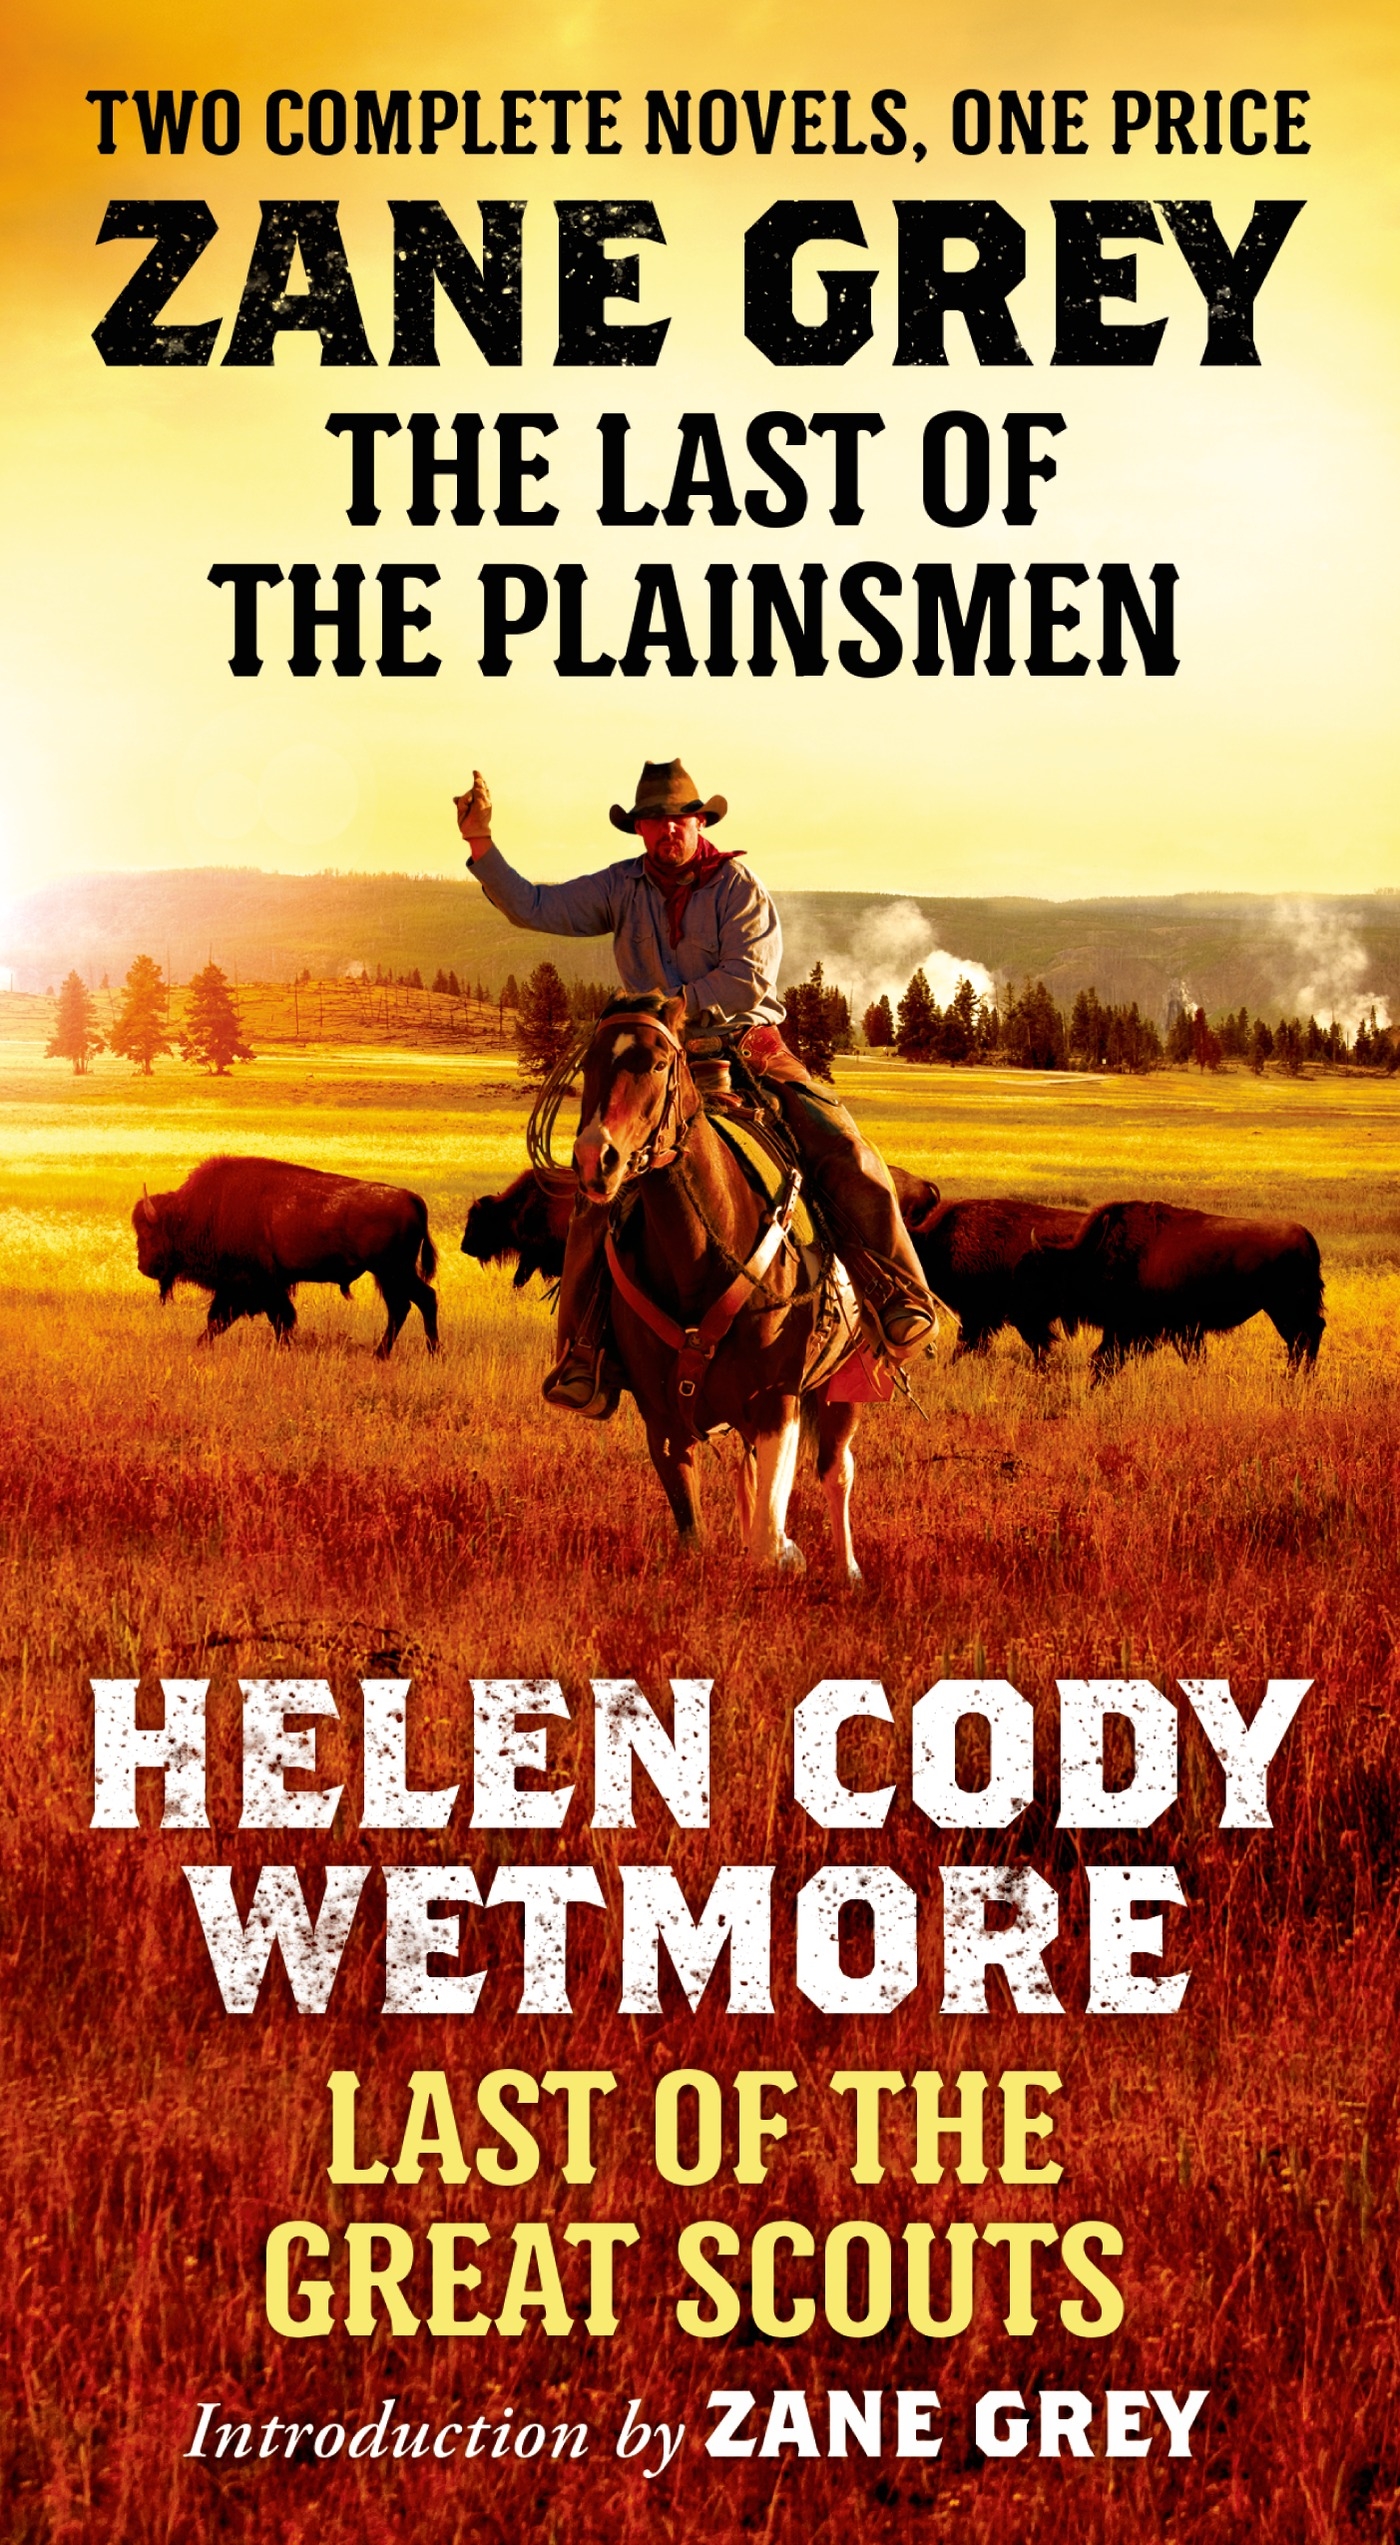 The Last of the Plainsmen and Last of the Great Scouts : Two Complete Novels by Zane Grey, Helen Cody Wetmore